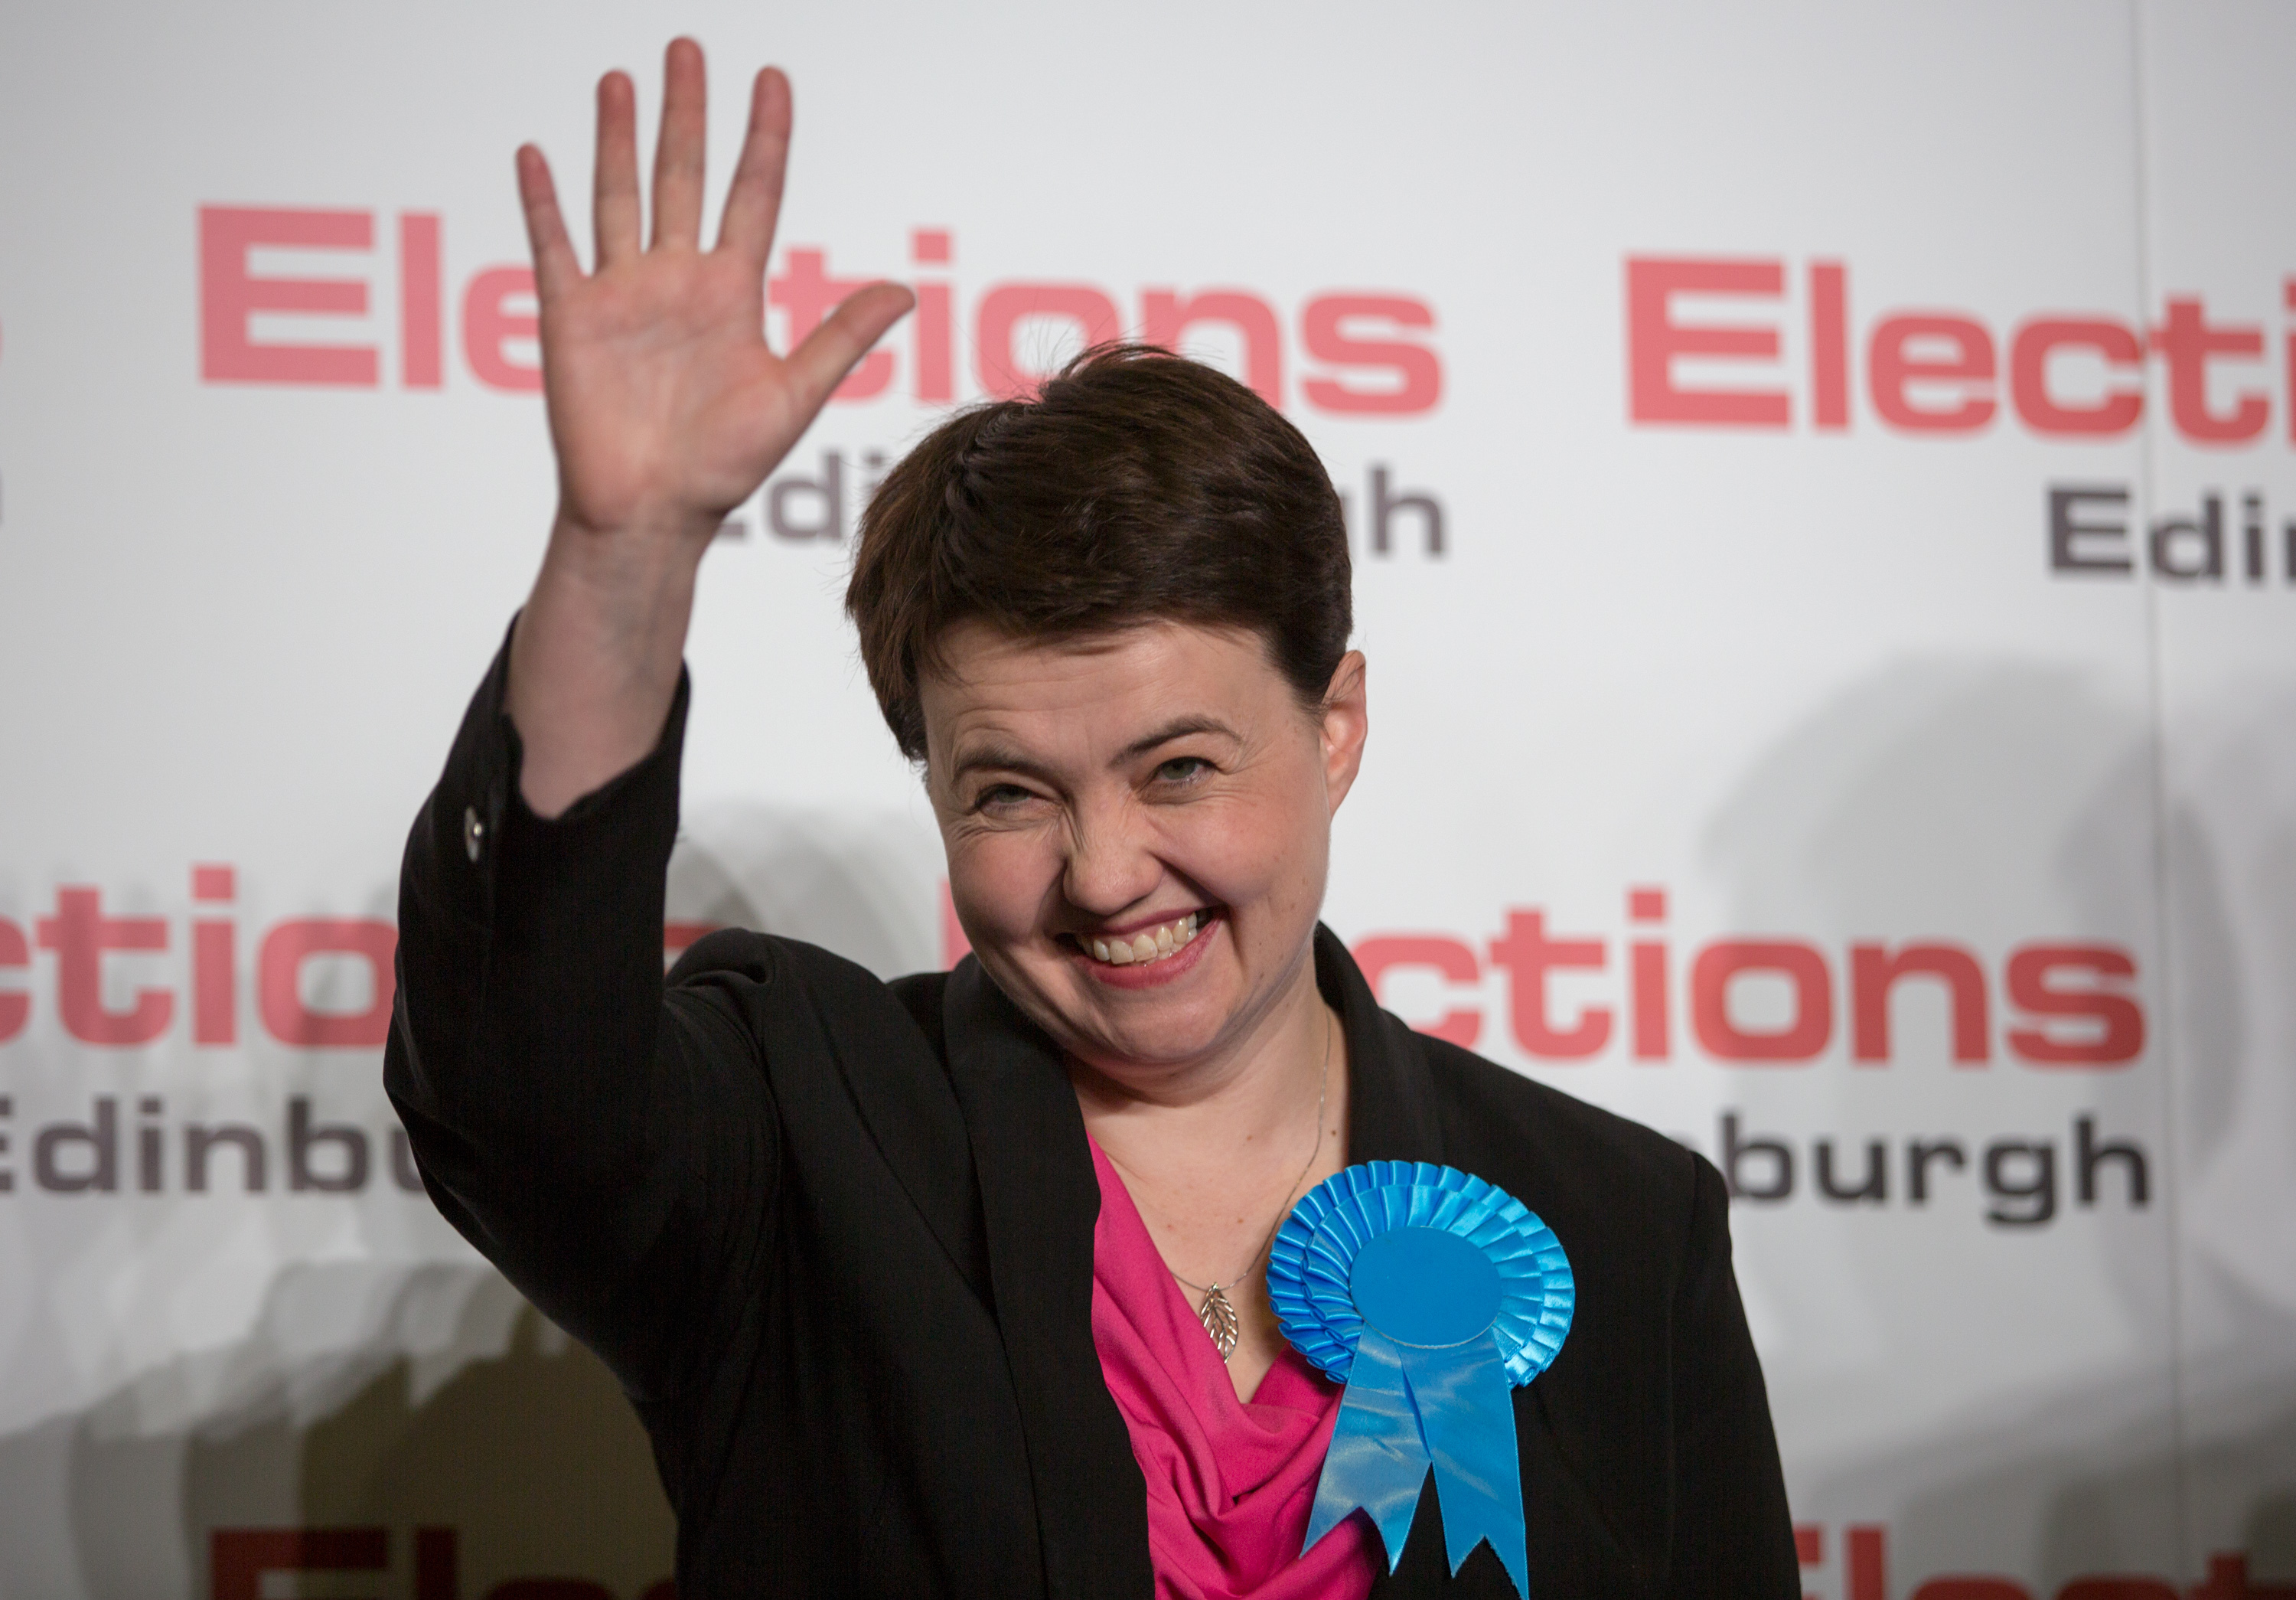 Ruth Davidson could wave goodbye to the UK Conservatives if the party is led by Boris Johnson